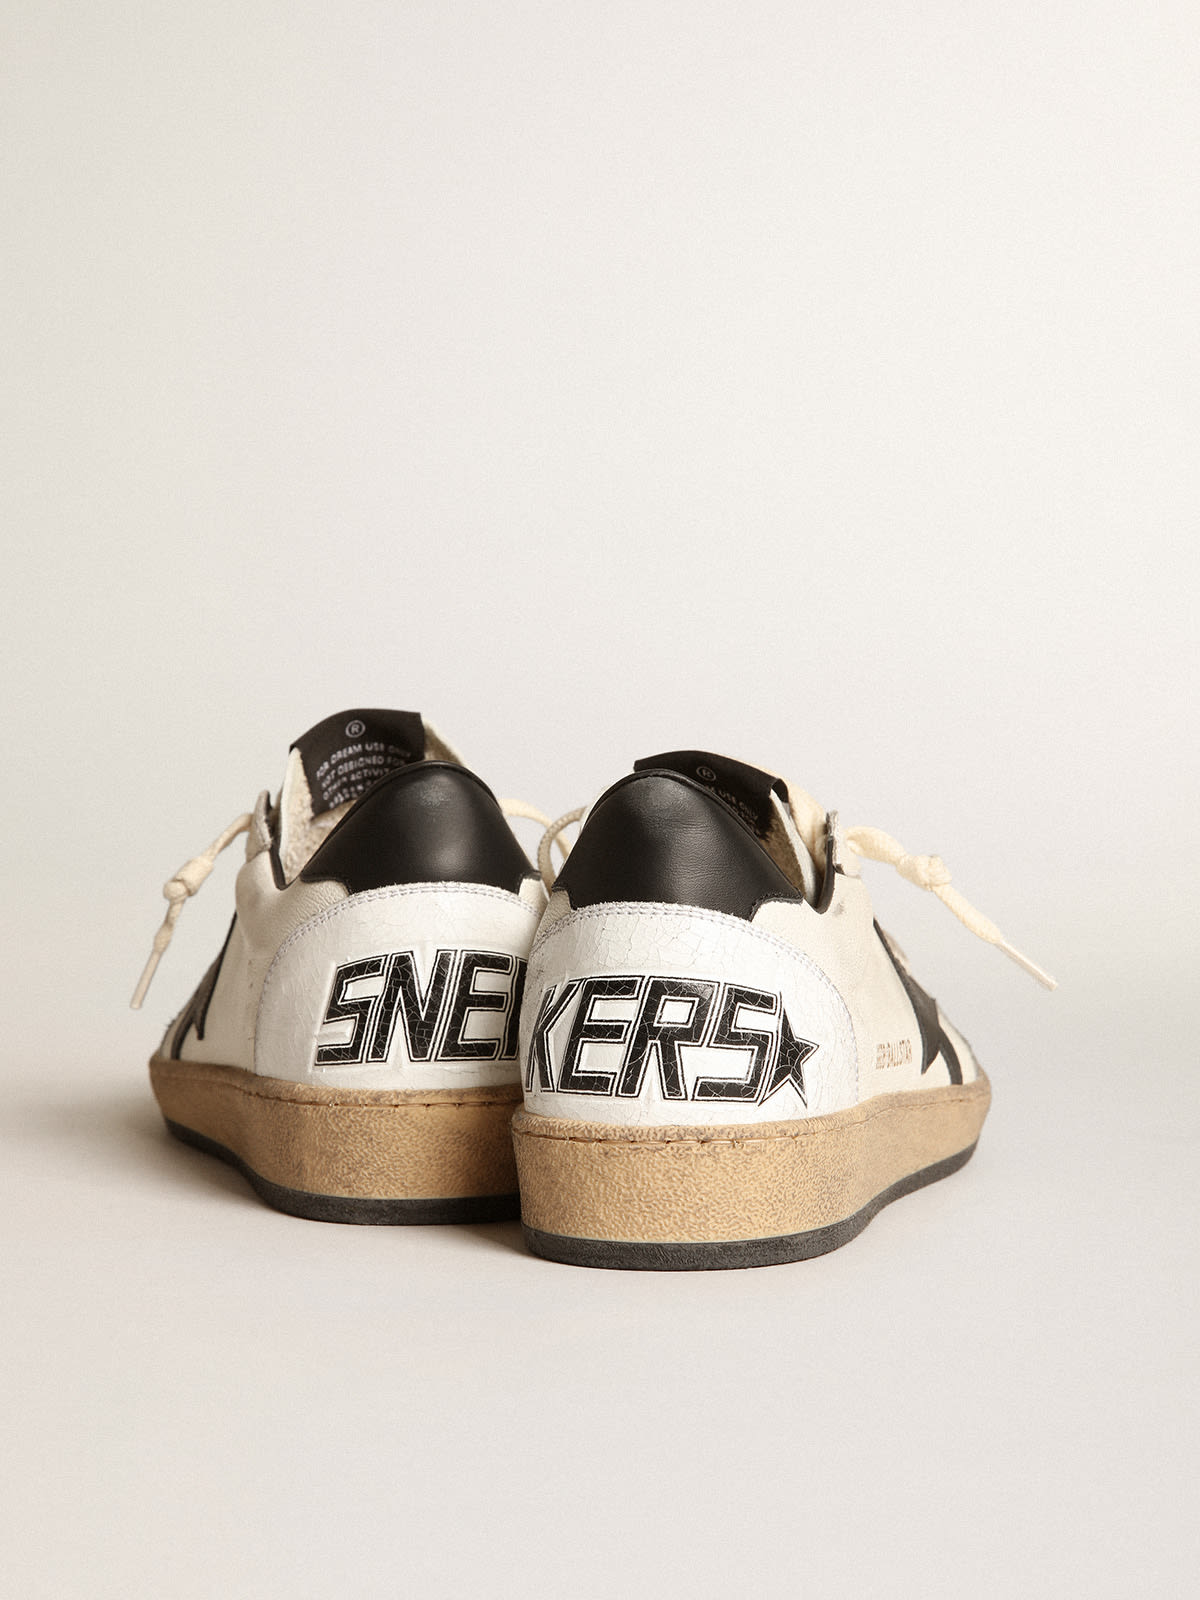 Golden Goose - Men's Ball Star sneakers in white nappa leather with black leather star and heel tab in 